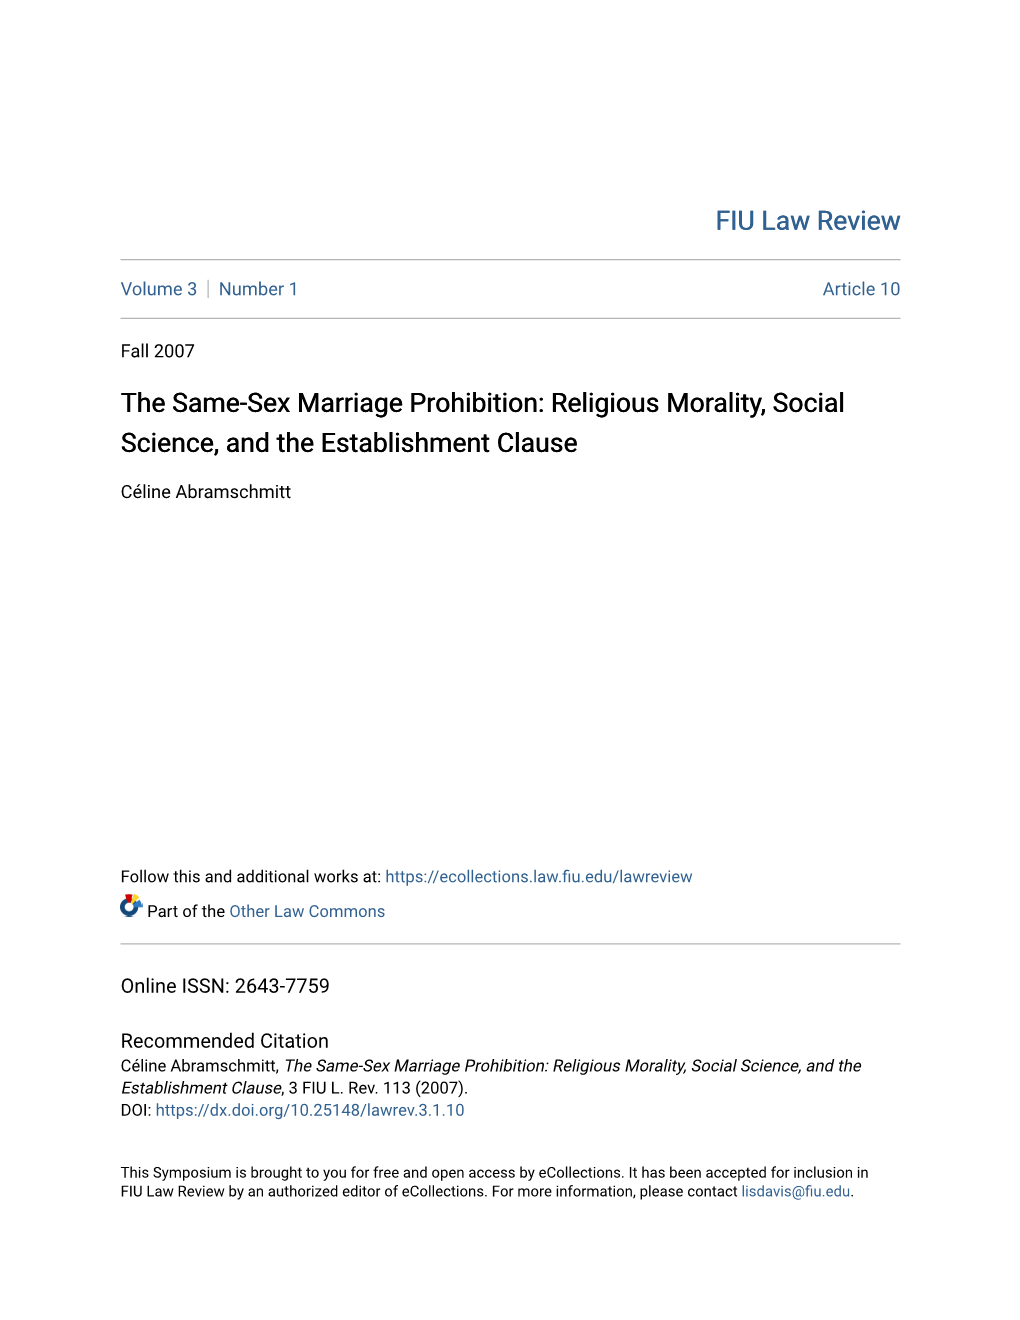 The Same-Sex Marriage Prohibition: Religious Morality, Social Science, and the Establishment Clause